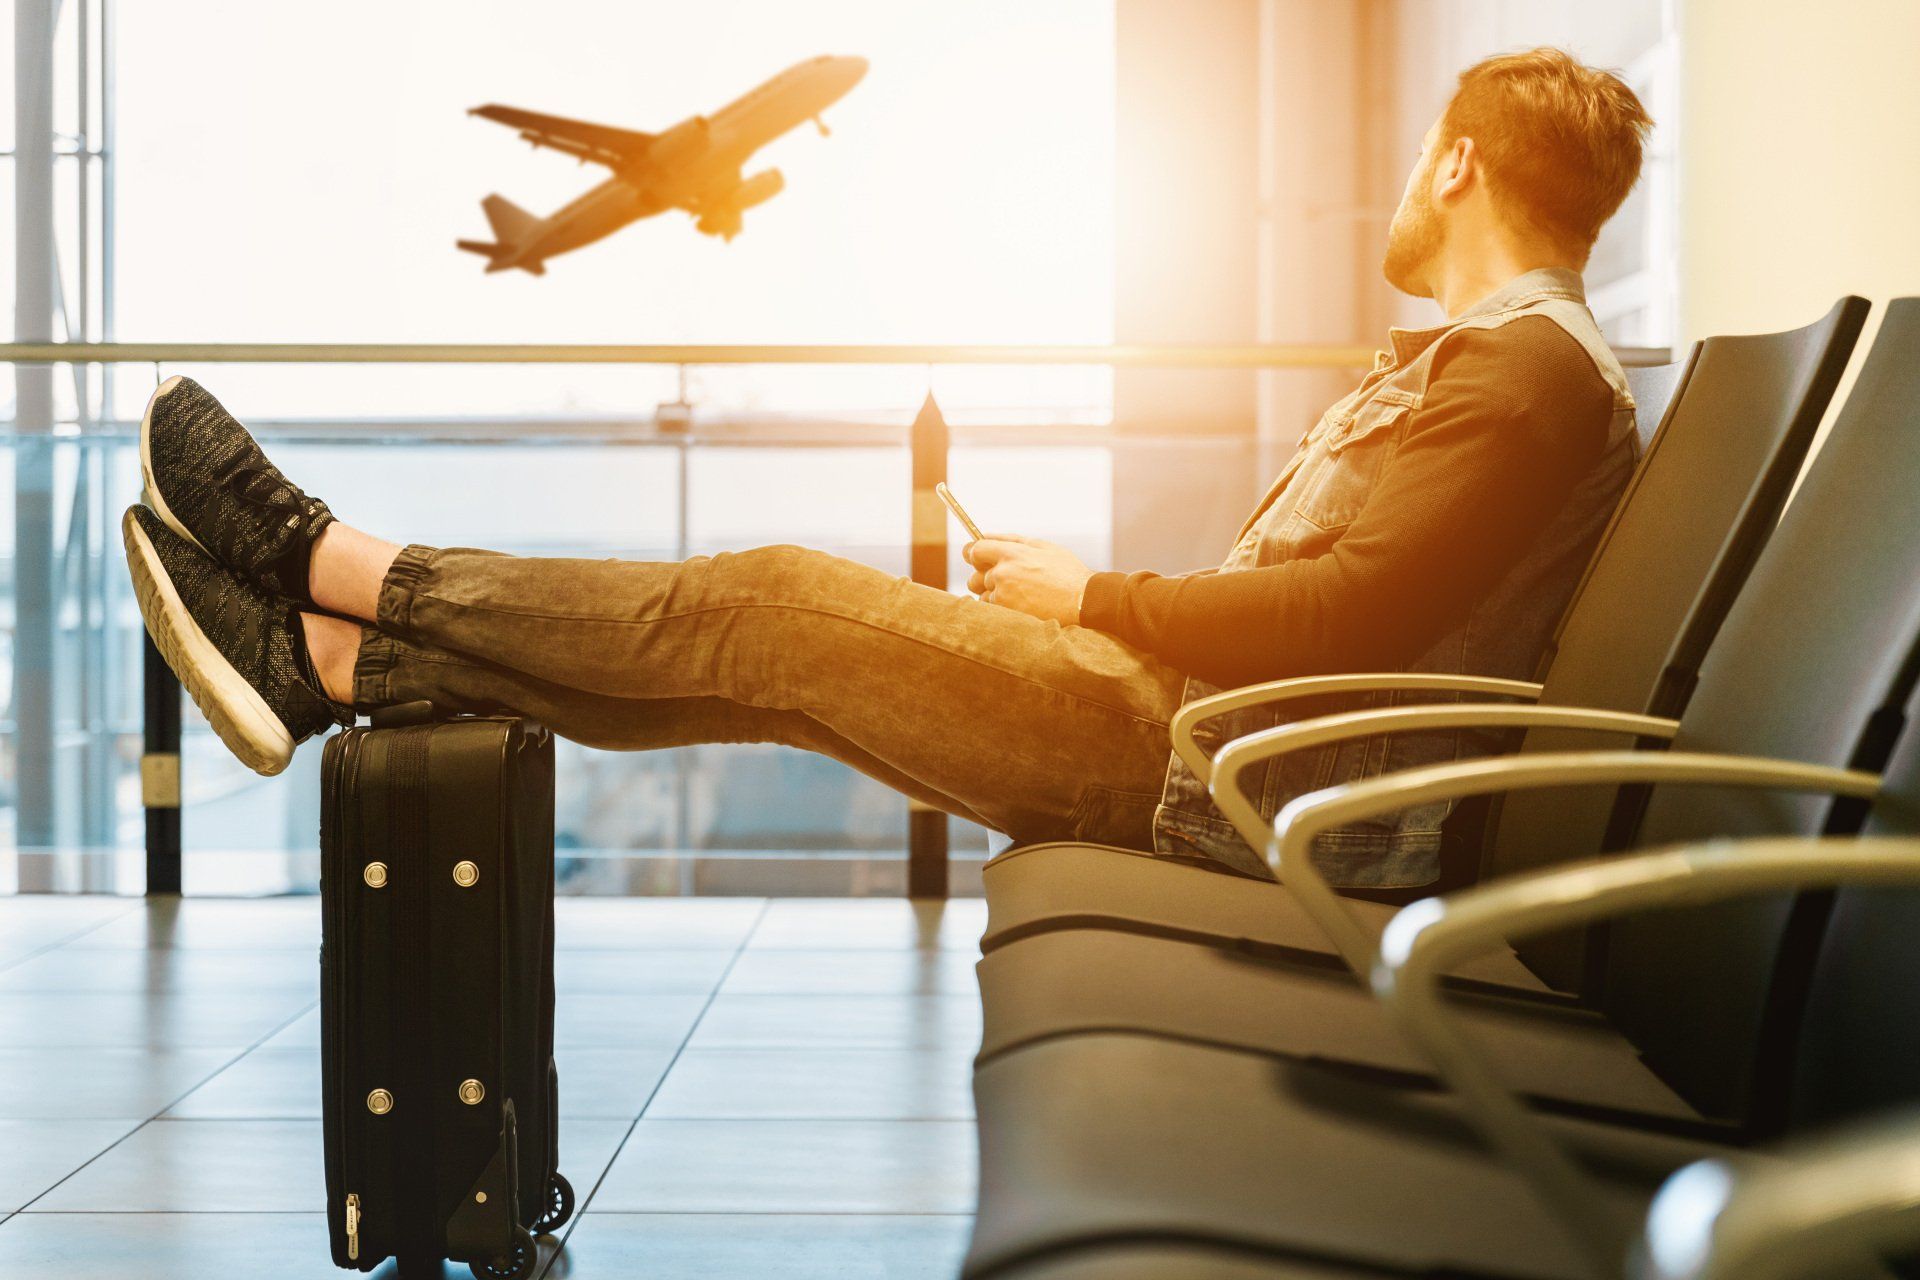 Delayed or cancelled flight? Here are two ways to claim compensation